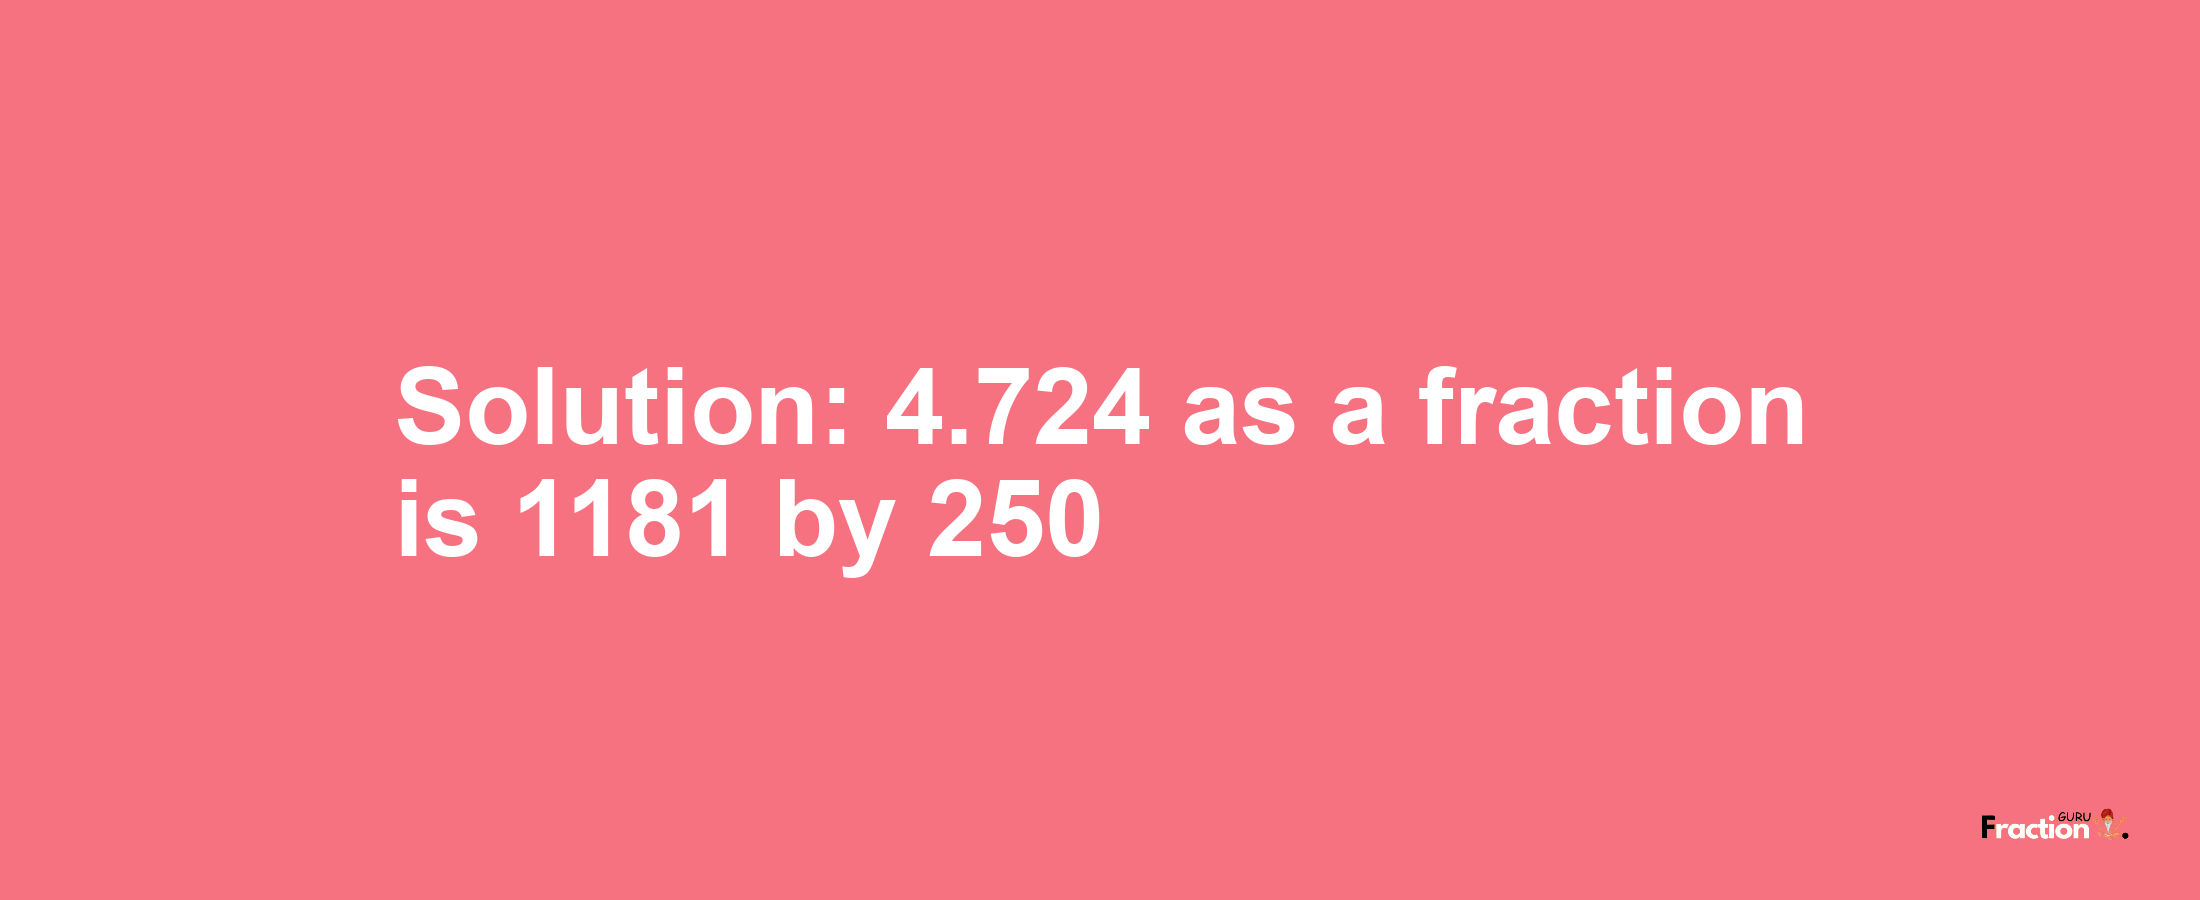 Solution:4.724 as a fraction is 1181/250